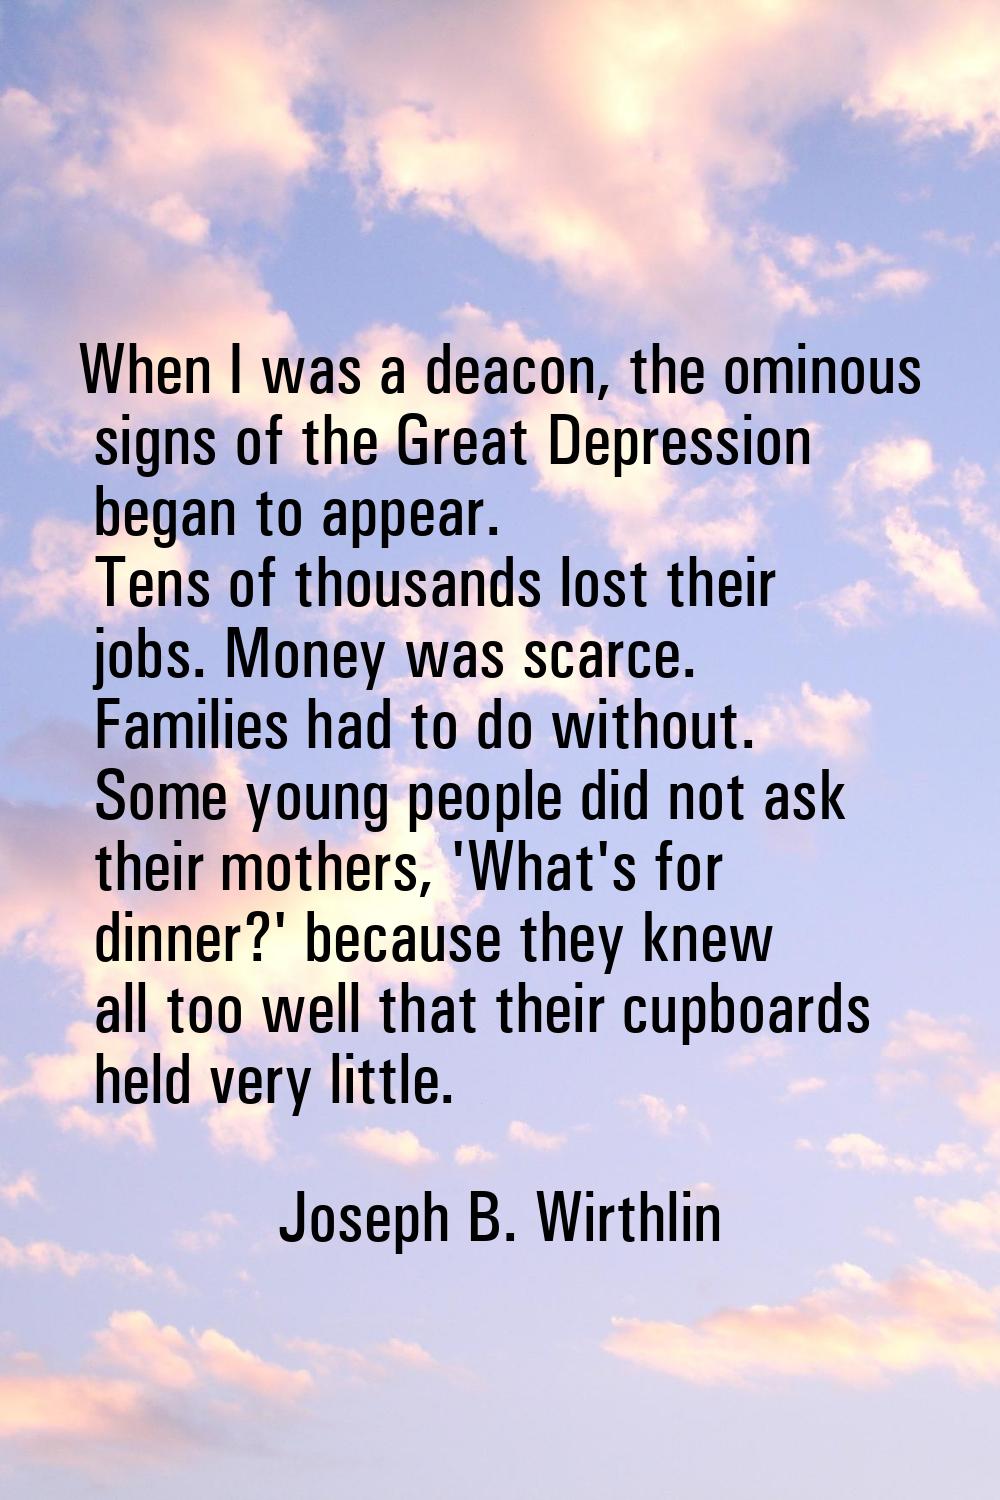 When I was a deacon, the ominous signs of the Great Depression began to appear. Tens of thousands l